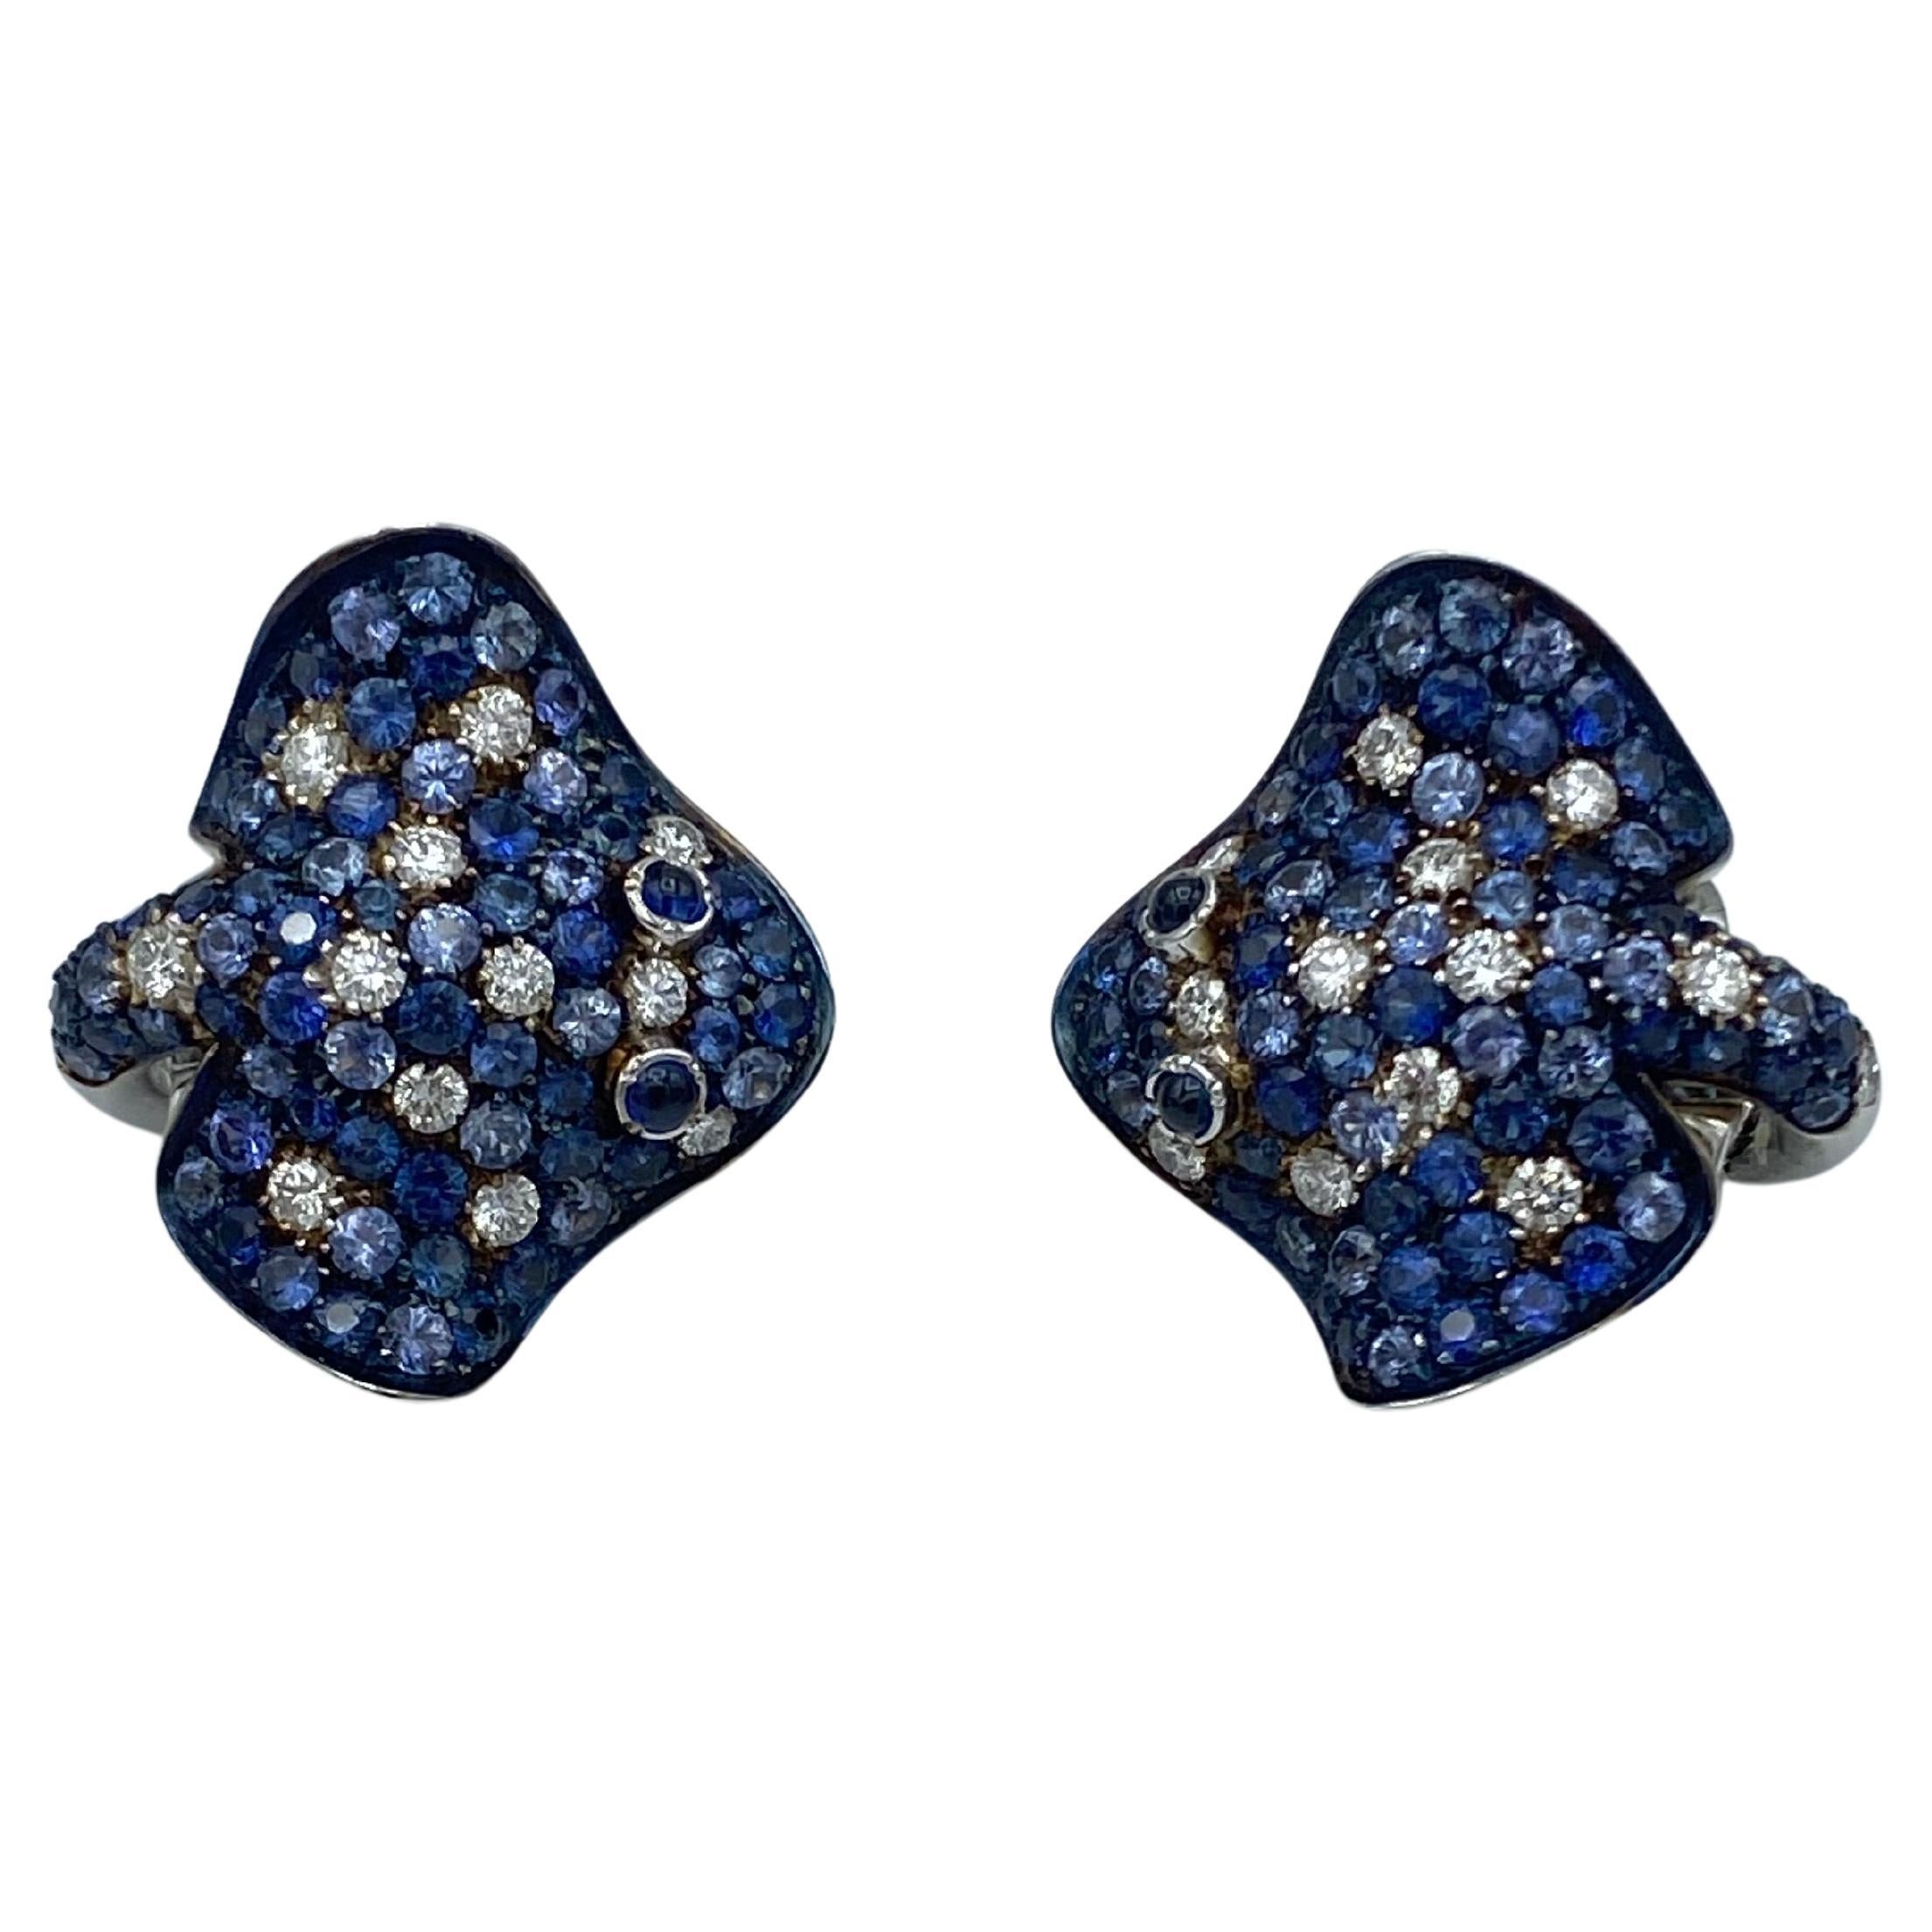 Petronilla Ray Fish White Diamond Blue Sapphire 18Kt Gold Made in Italy Earrings For Sale